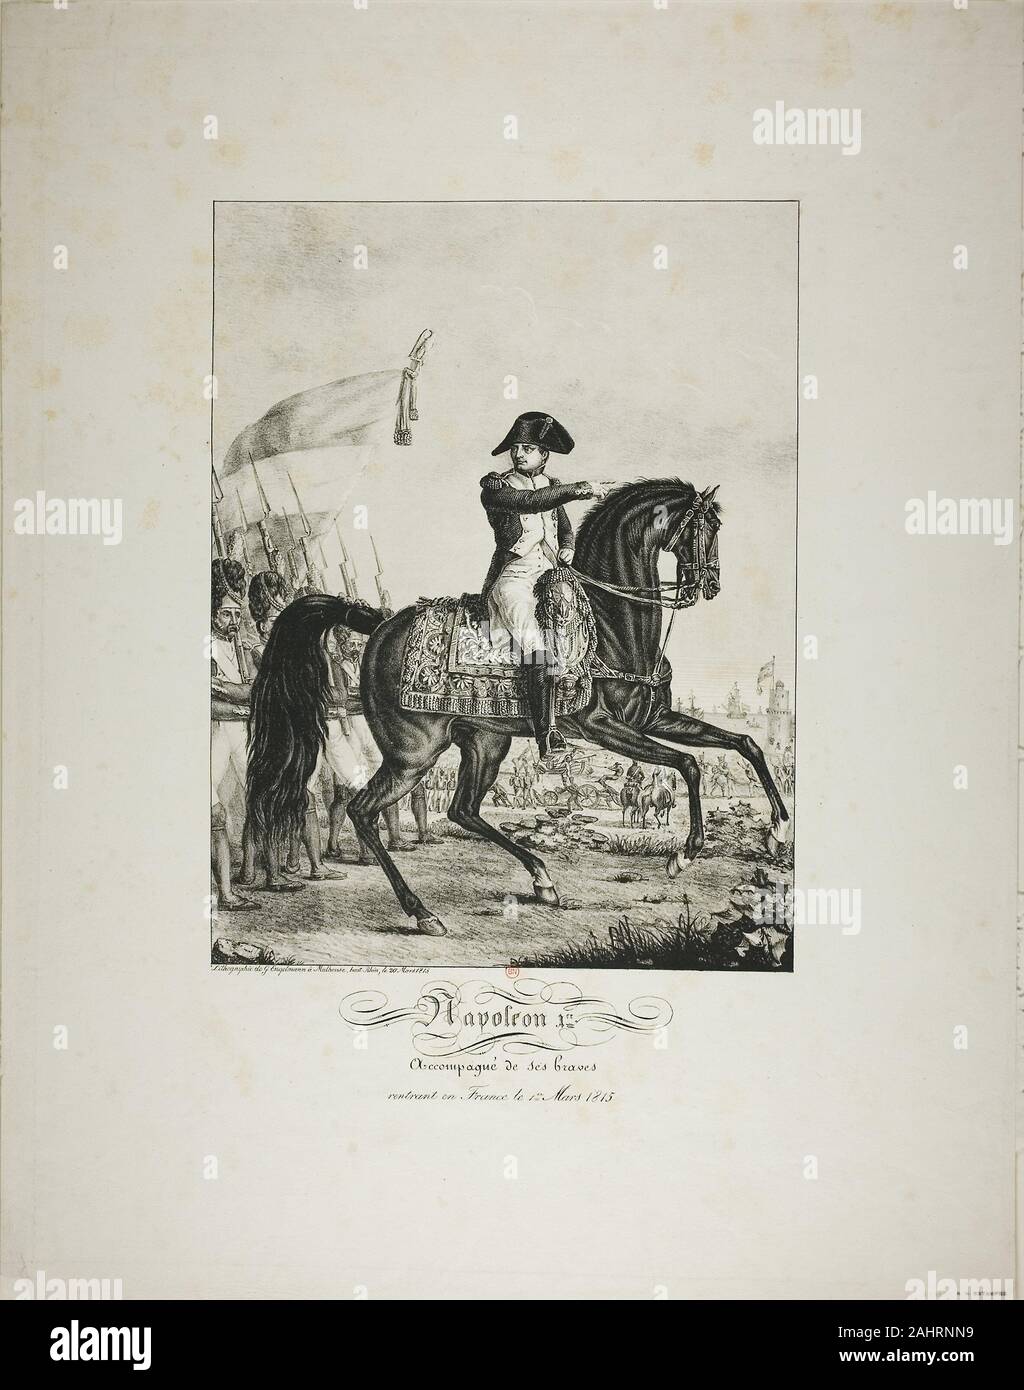 baron François Pascal Simon Gérard. Napoleon Accompanied by his Good Men, Returning to France on March 1, 1815. 1815. France. Lithograph in black, with a second tint stone in gray, on ivory wove paper Stock Photo